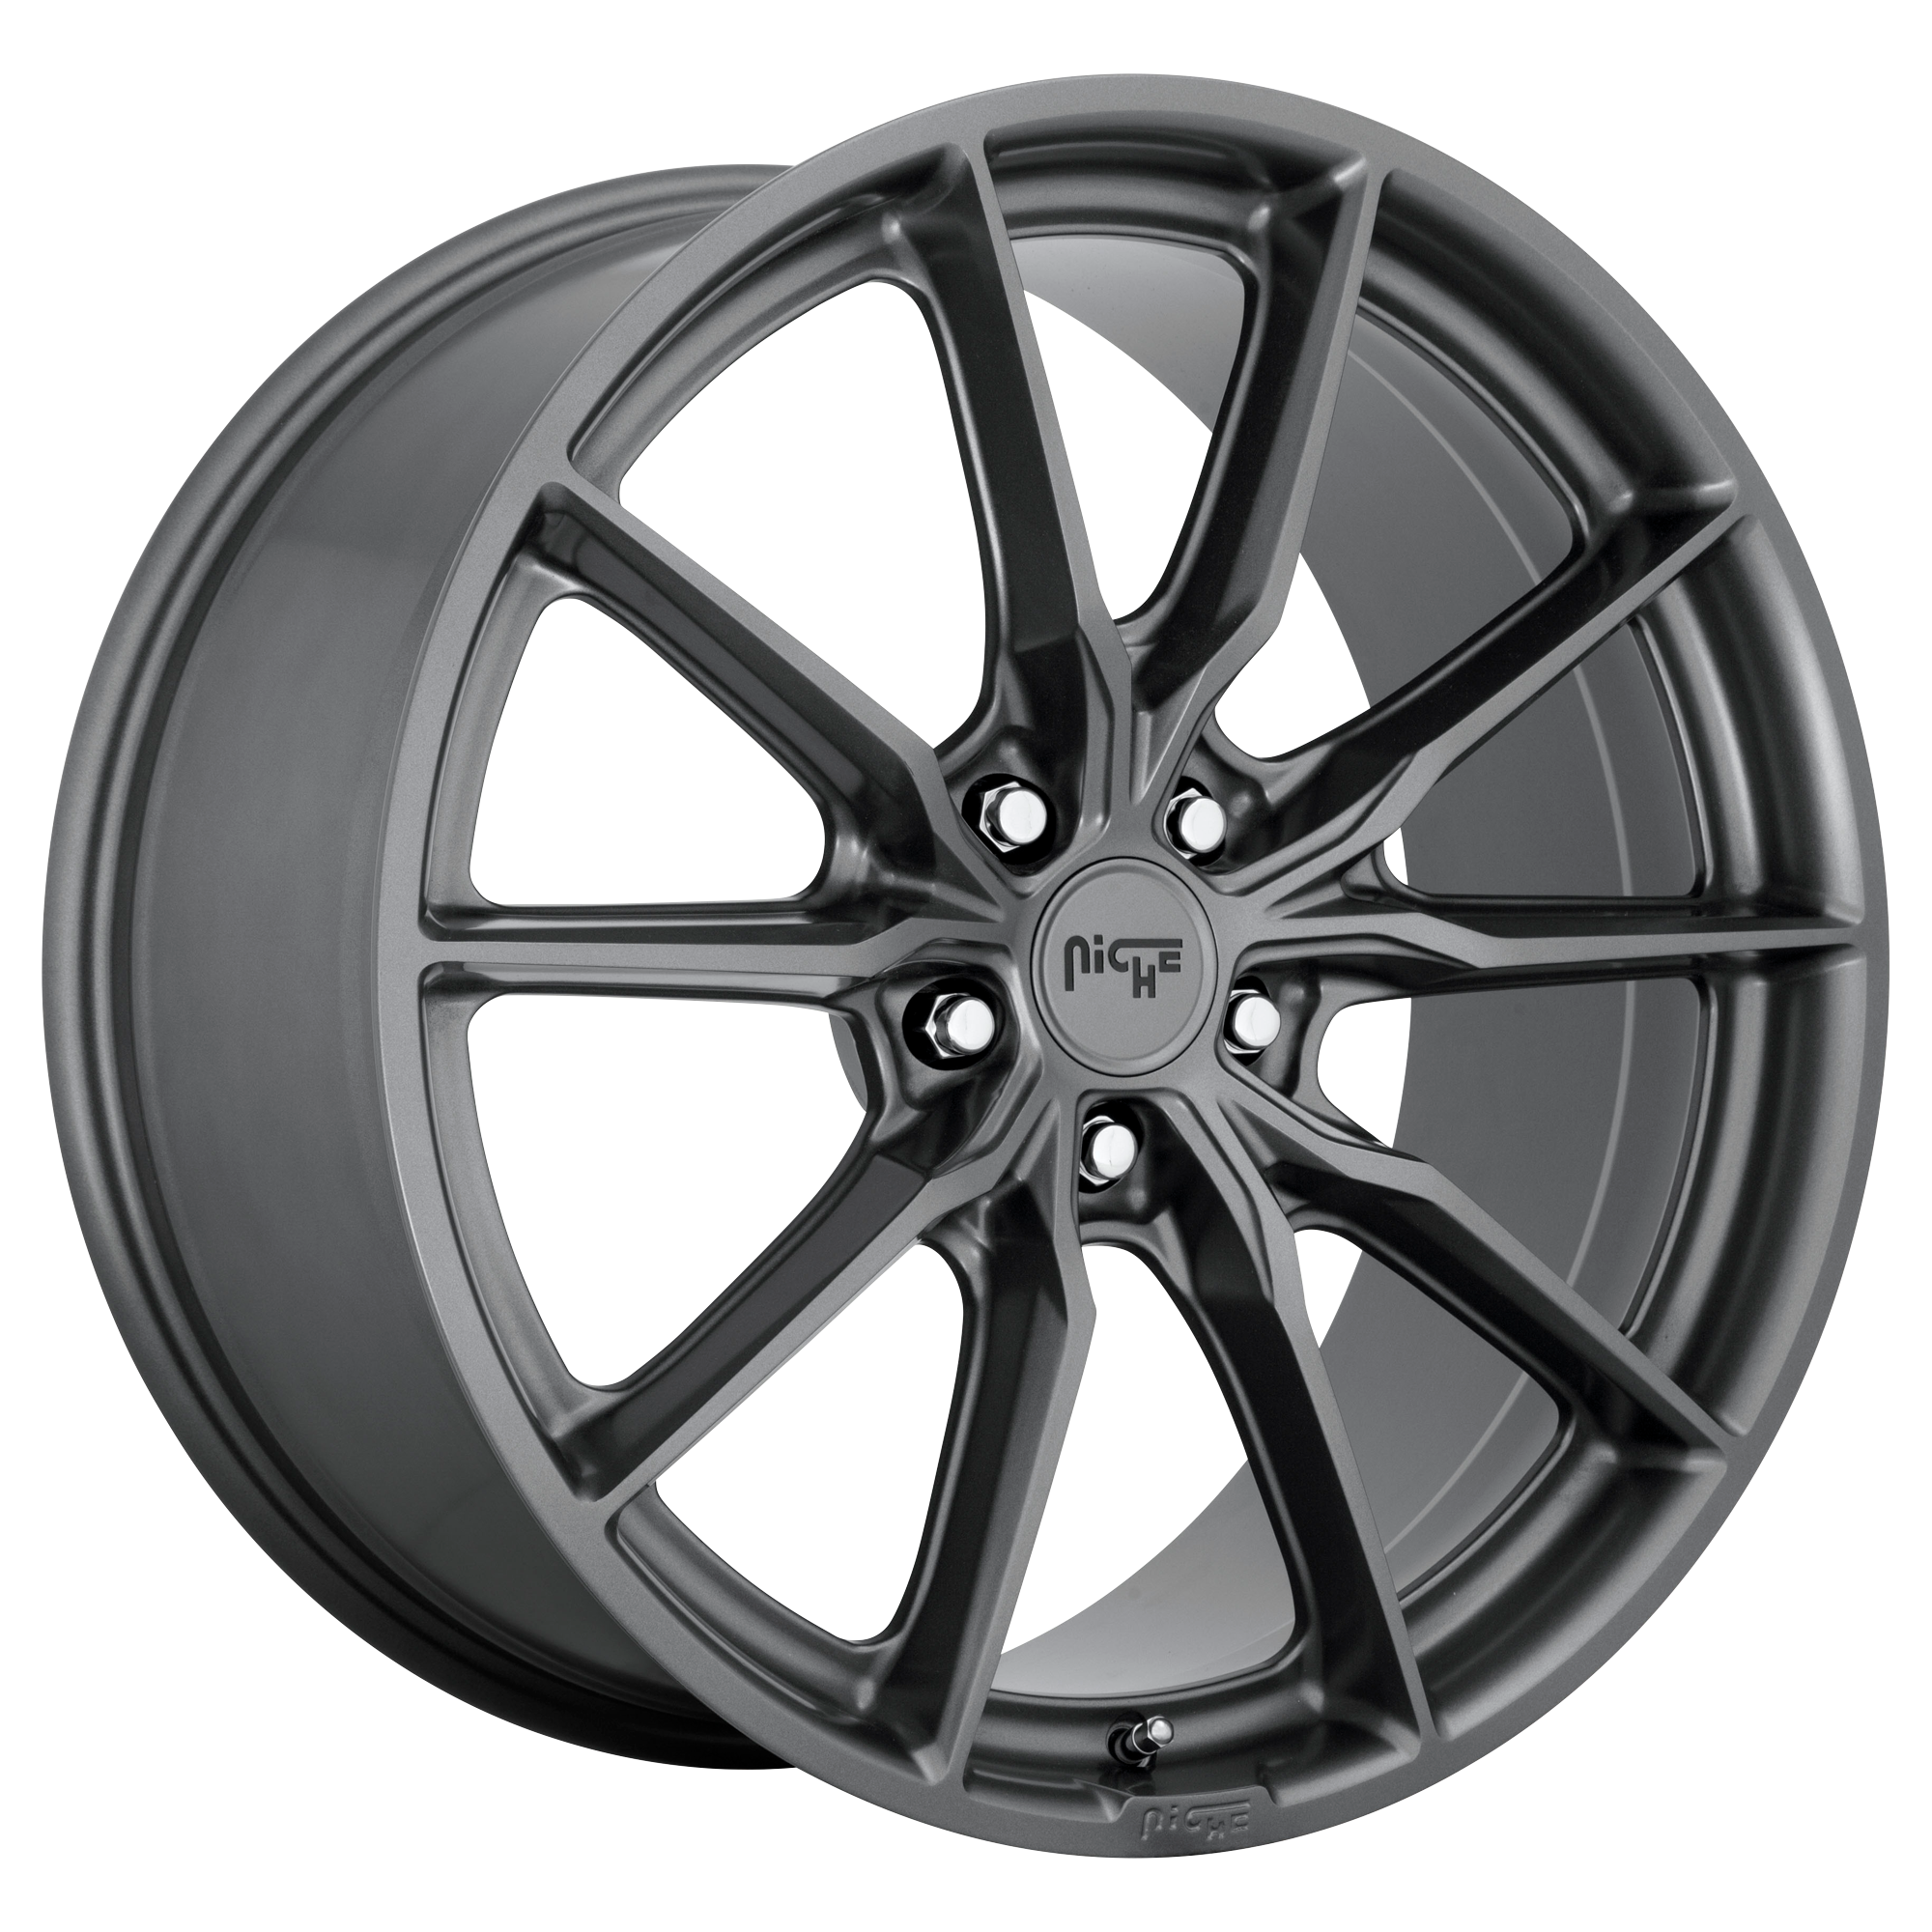 RAINIER 18x8 5x120.00 MATTE ANTHRACITE (40 mm) - Tires and Engine Performance